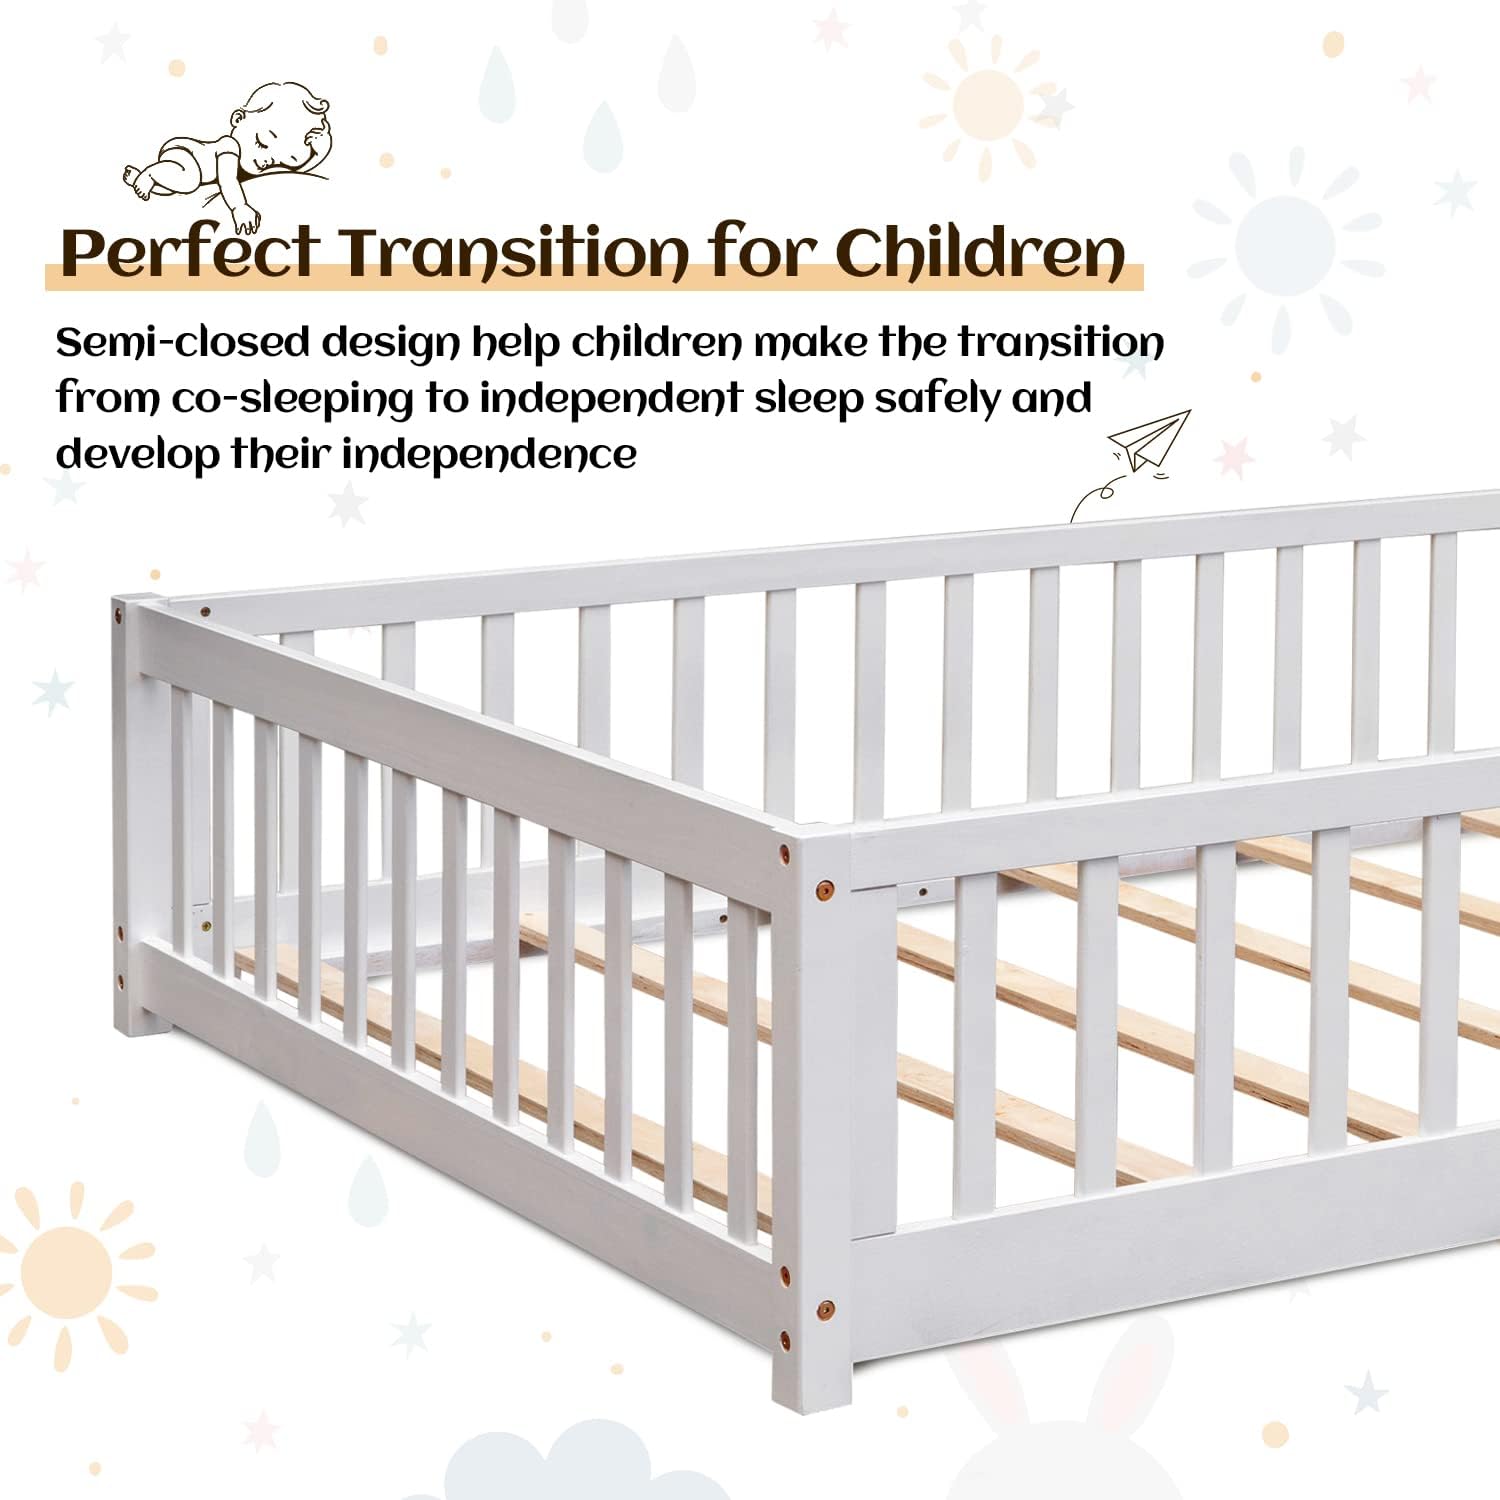 Twin Floor Bed Frame for Toddler, Montessori Floor Bed with Fence and Wood Slats, Low Wood Platform Beds for Girls Boys Kids Happy Time, White - image 3 of 7